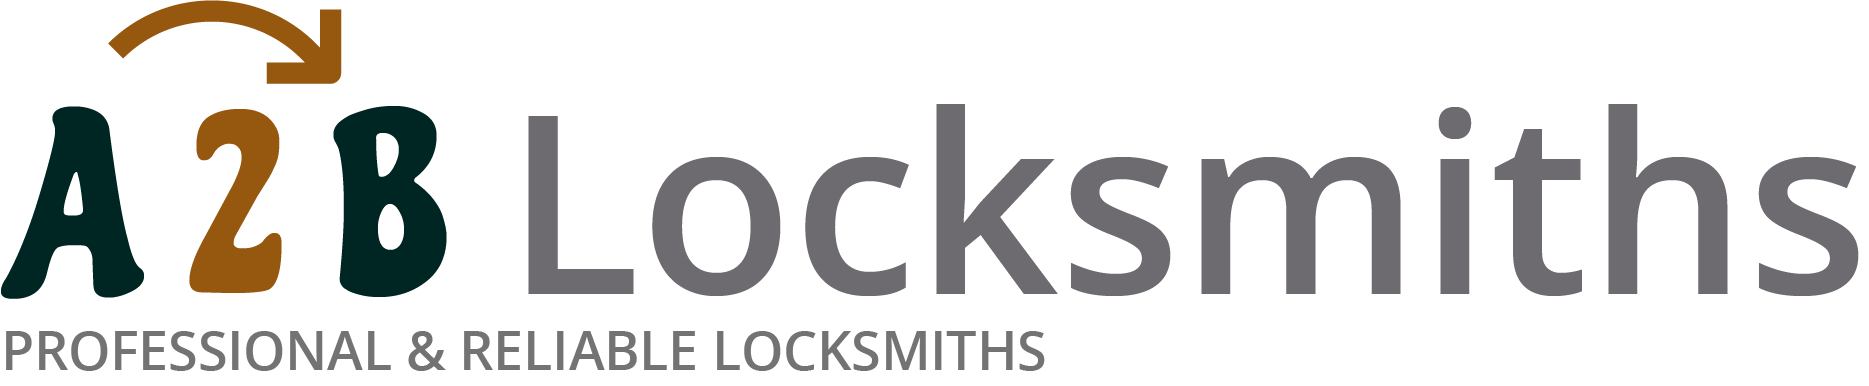 If you are locked out of house in Belper, our 24/7 local emergency locksmith services can help you.